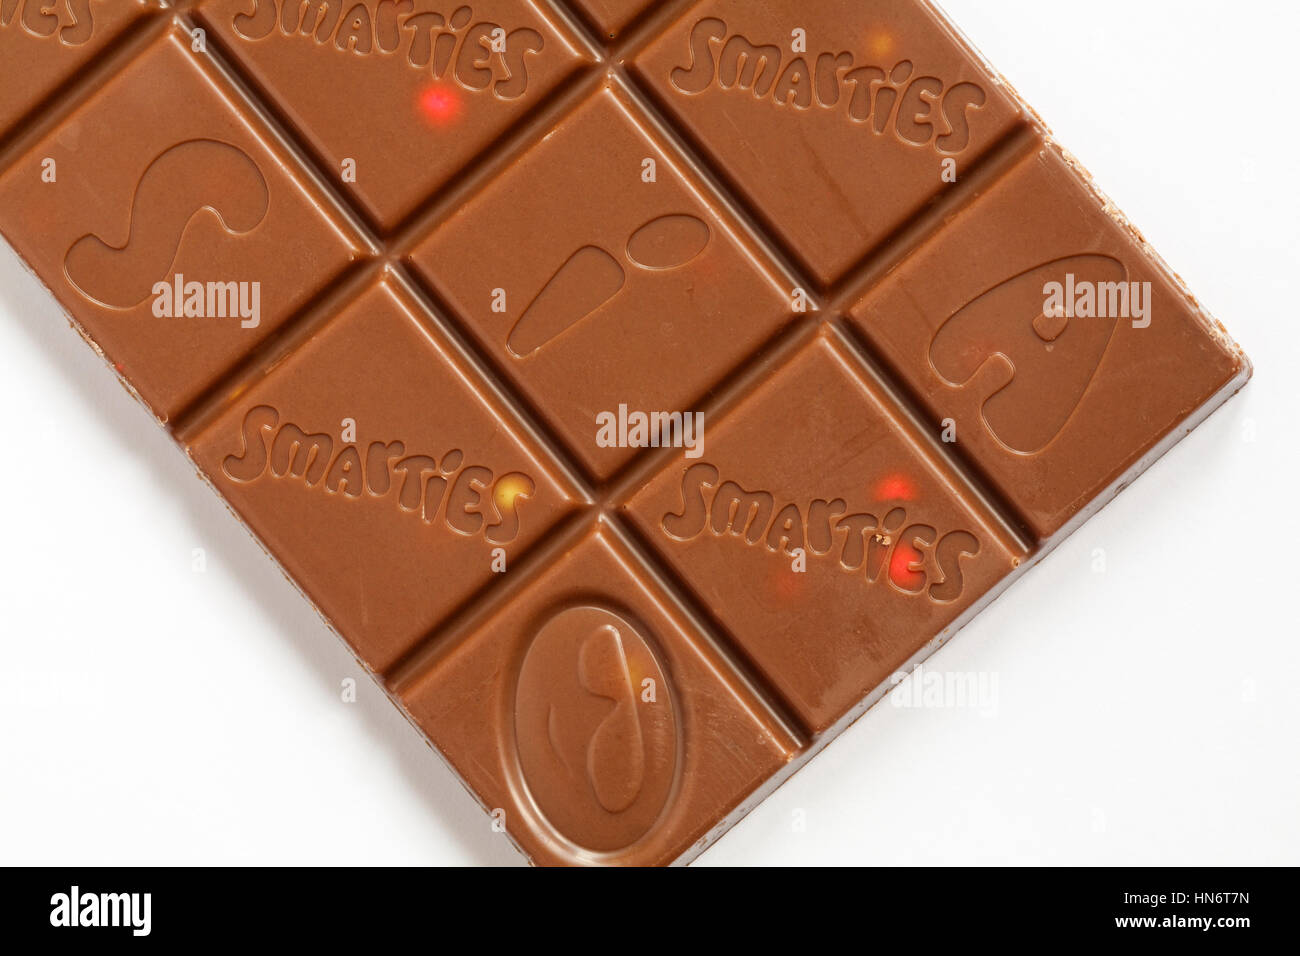 Bar of Nestle Smarties Festive Sharing Block of chocolate out of wrapper showing chocolate squares Stock Photo